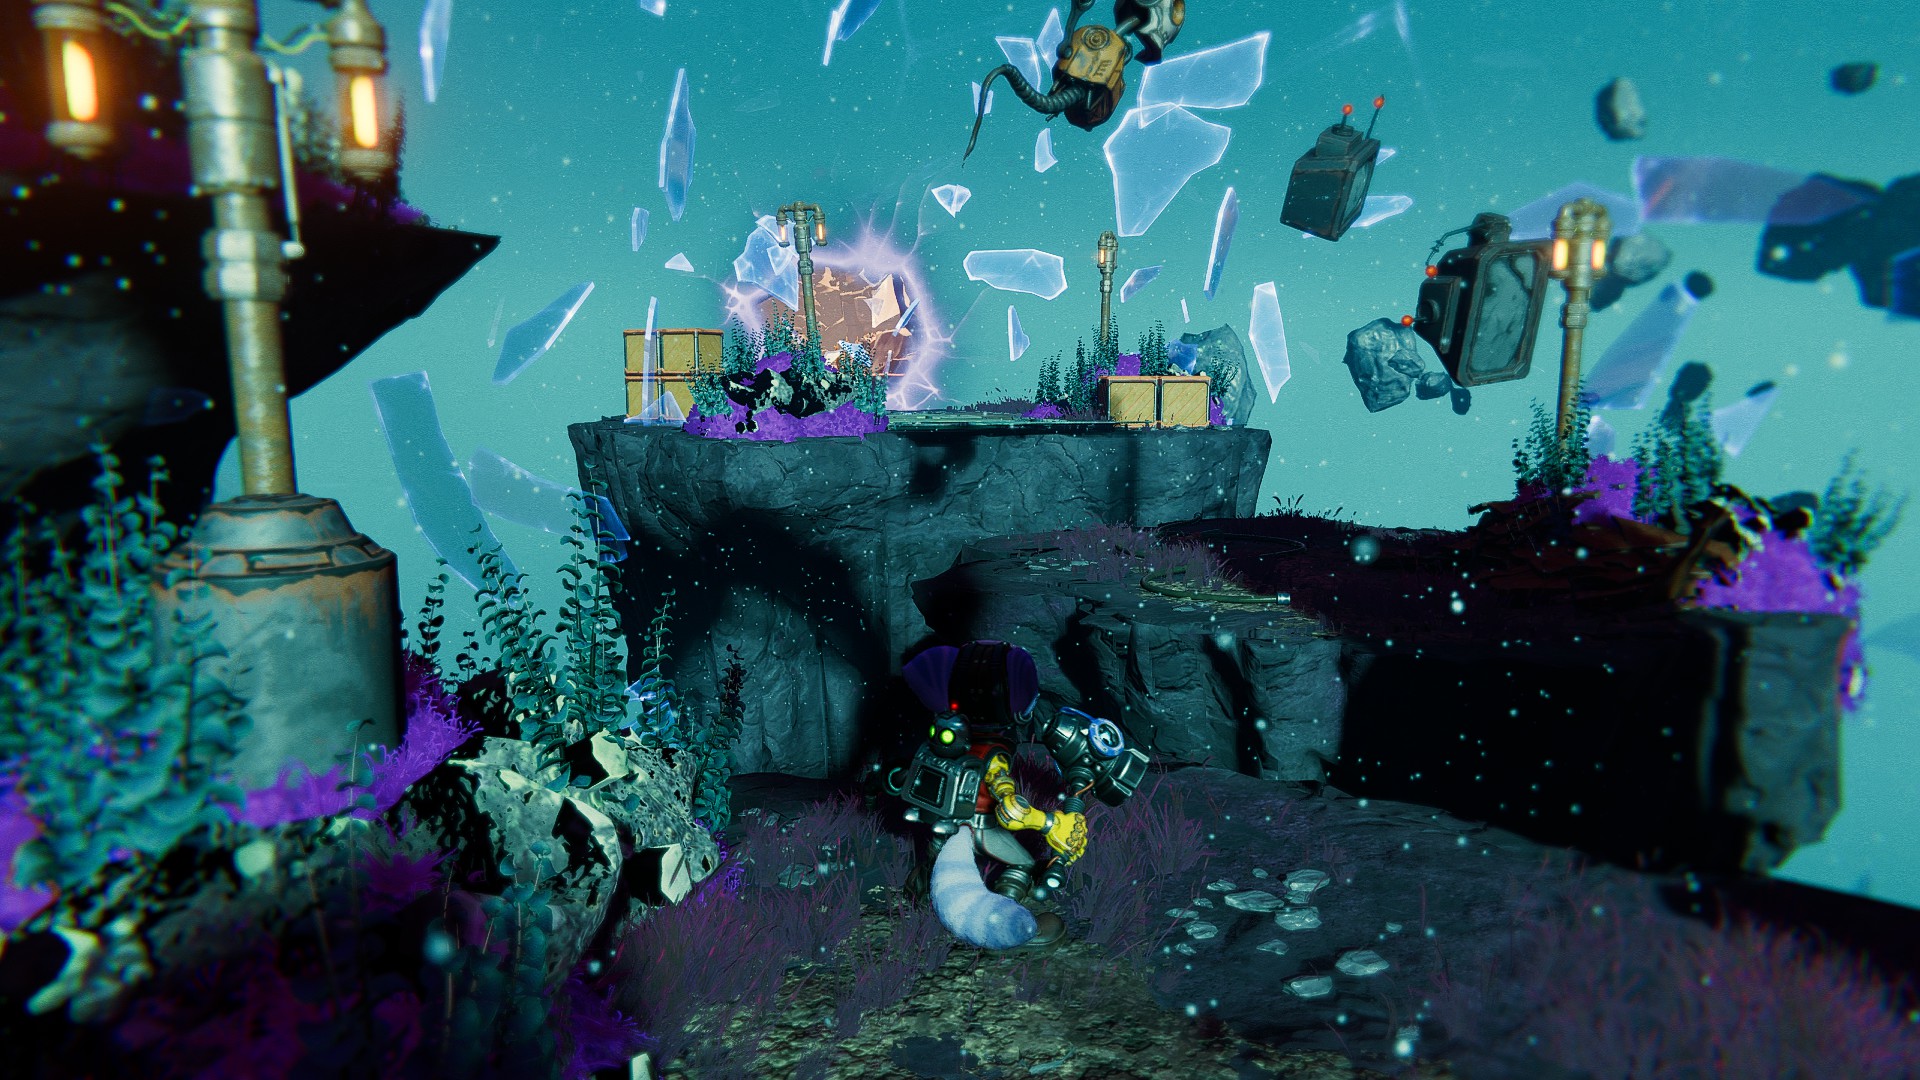 Rivet and Clank exploring a dimensional rift in Ratchet & Clank: Rift Apart.